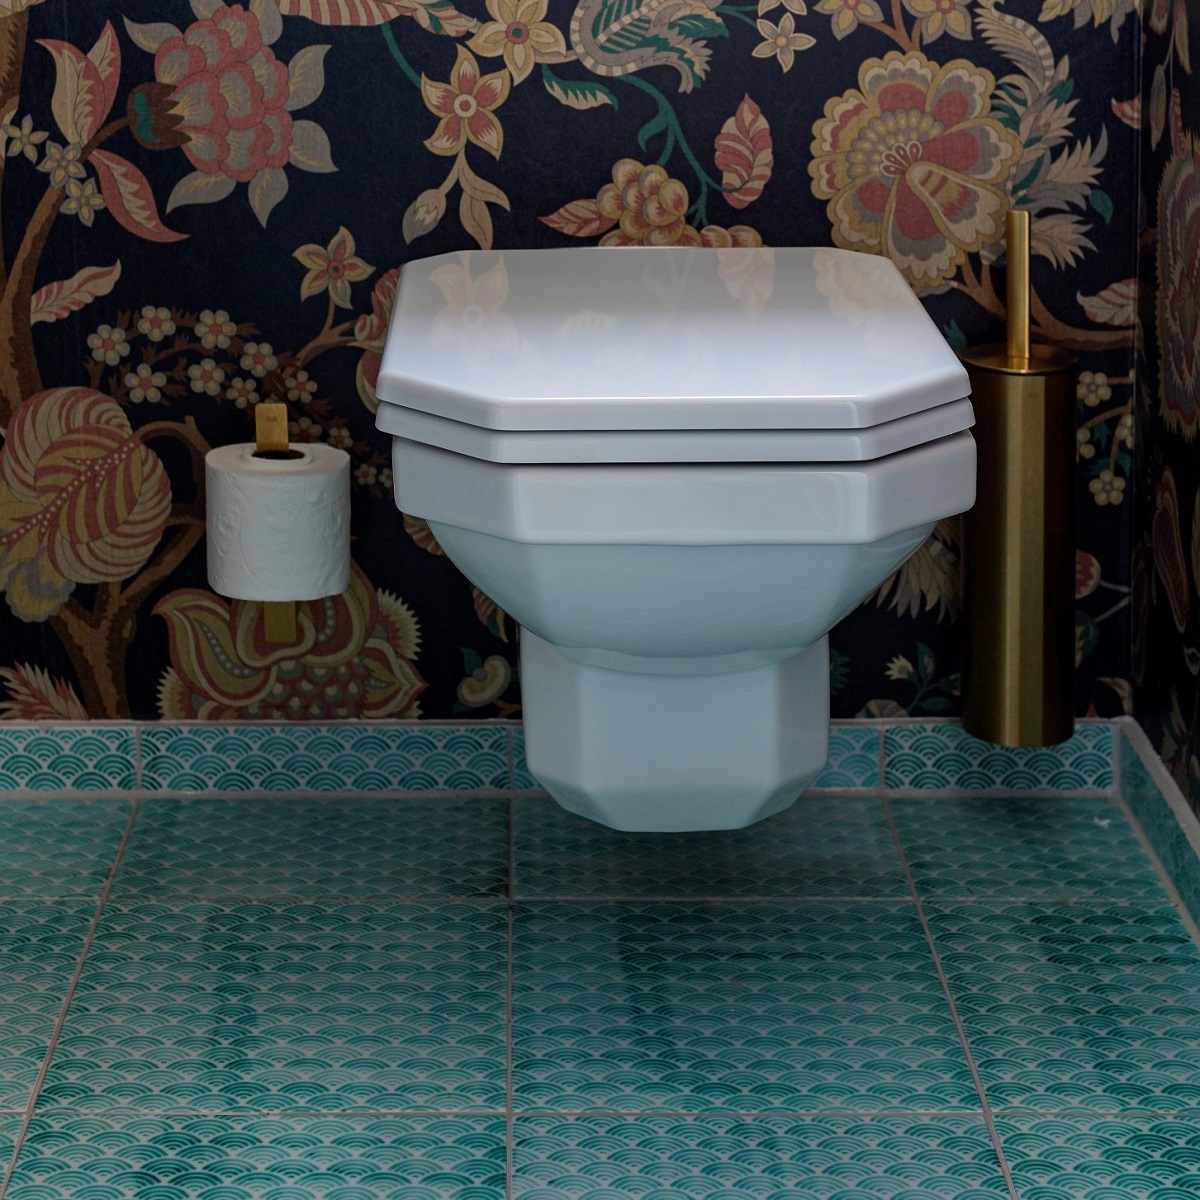 vintage style wall hung toilet against floral wallpaper and with brass unidrain fittings